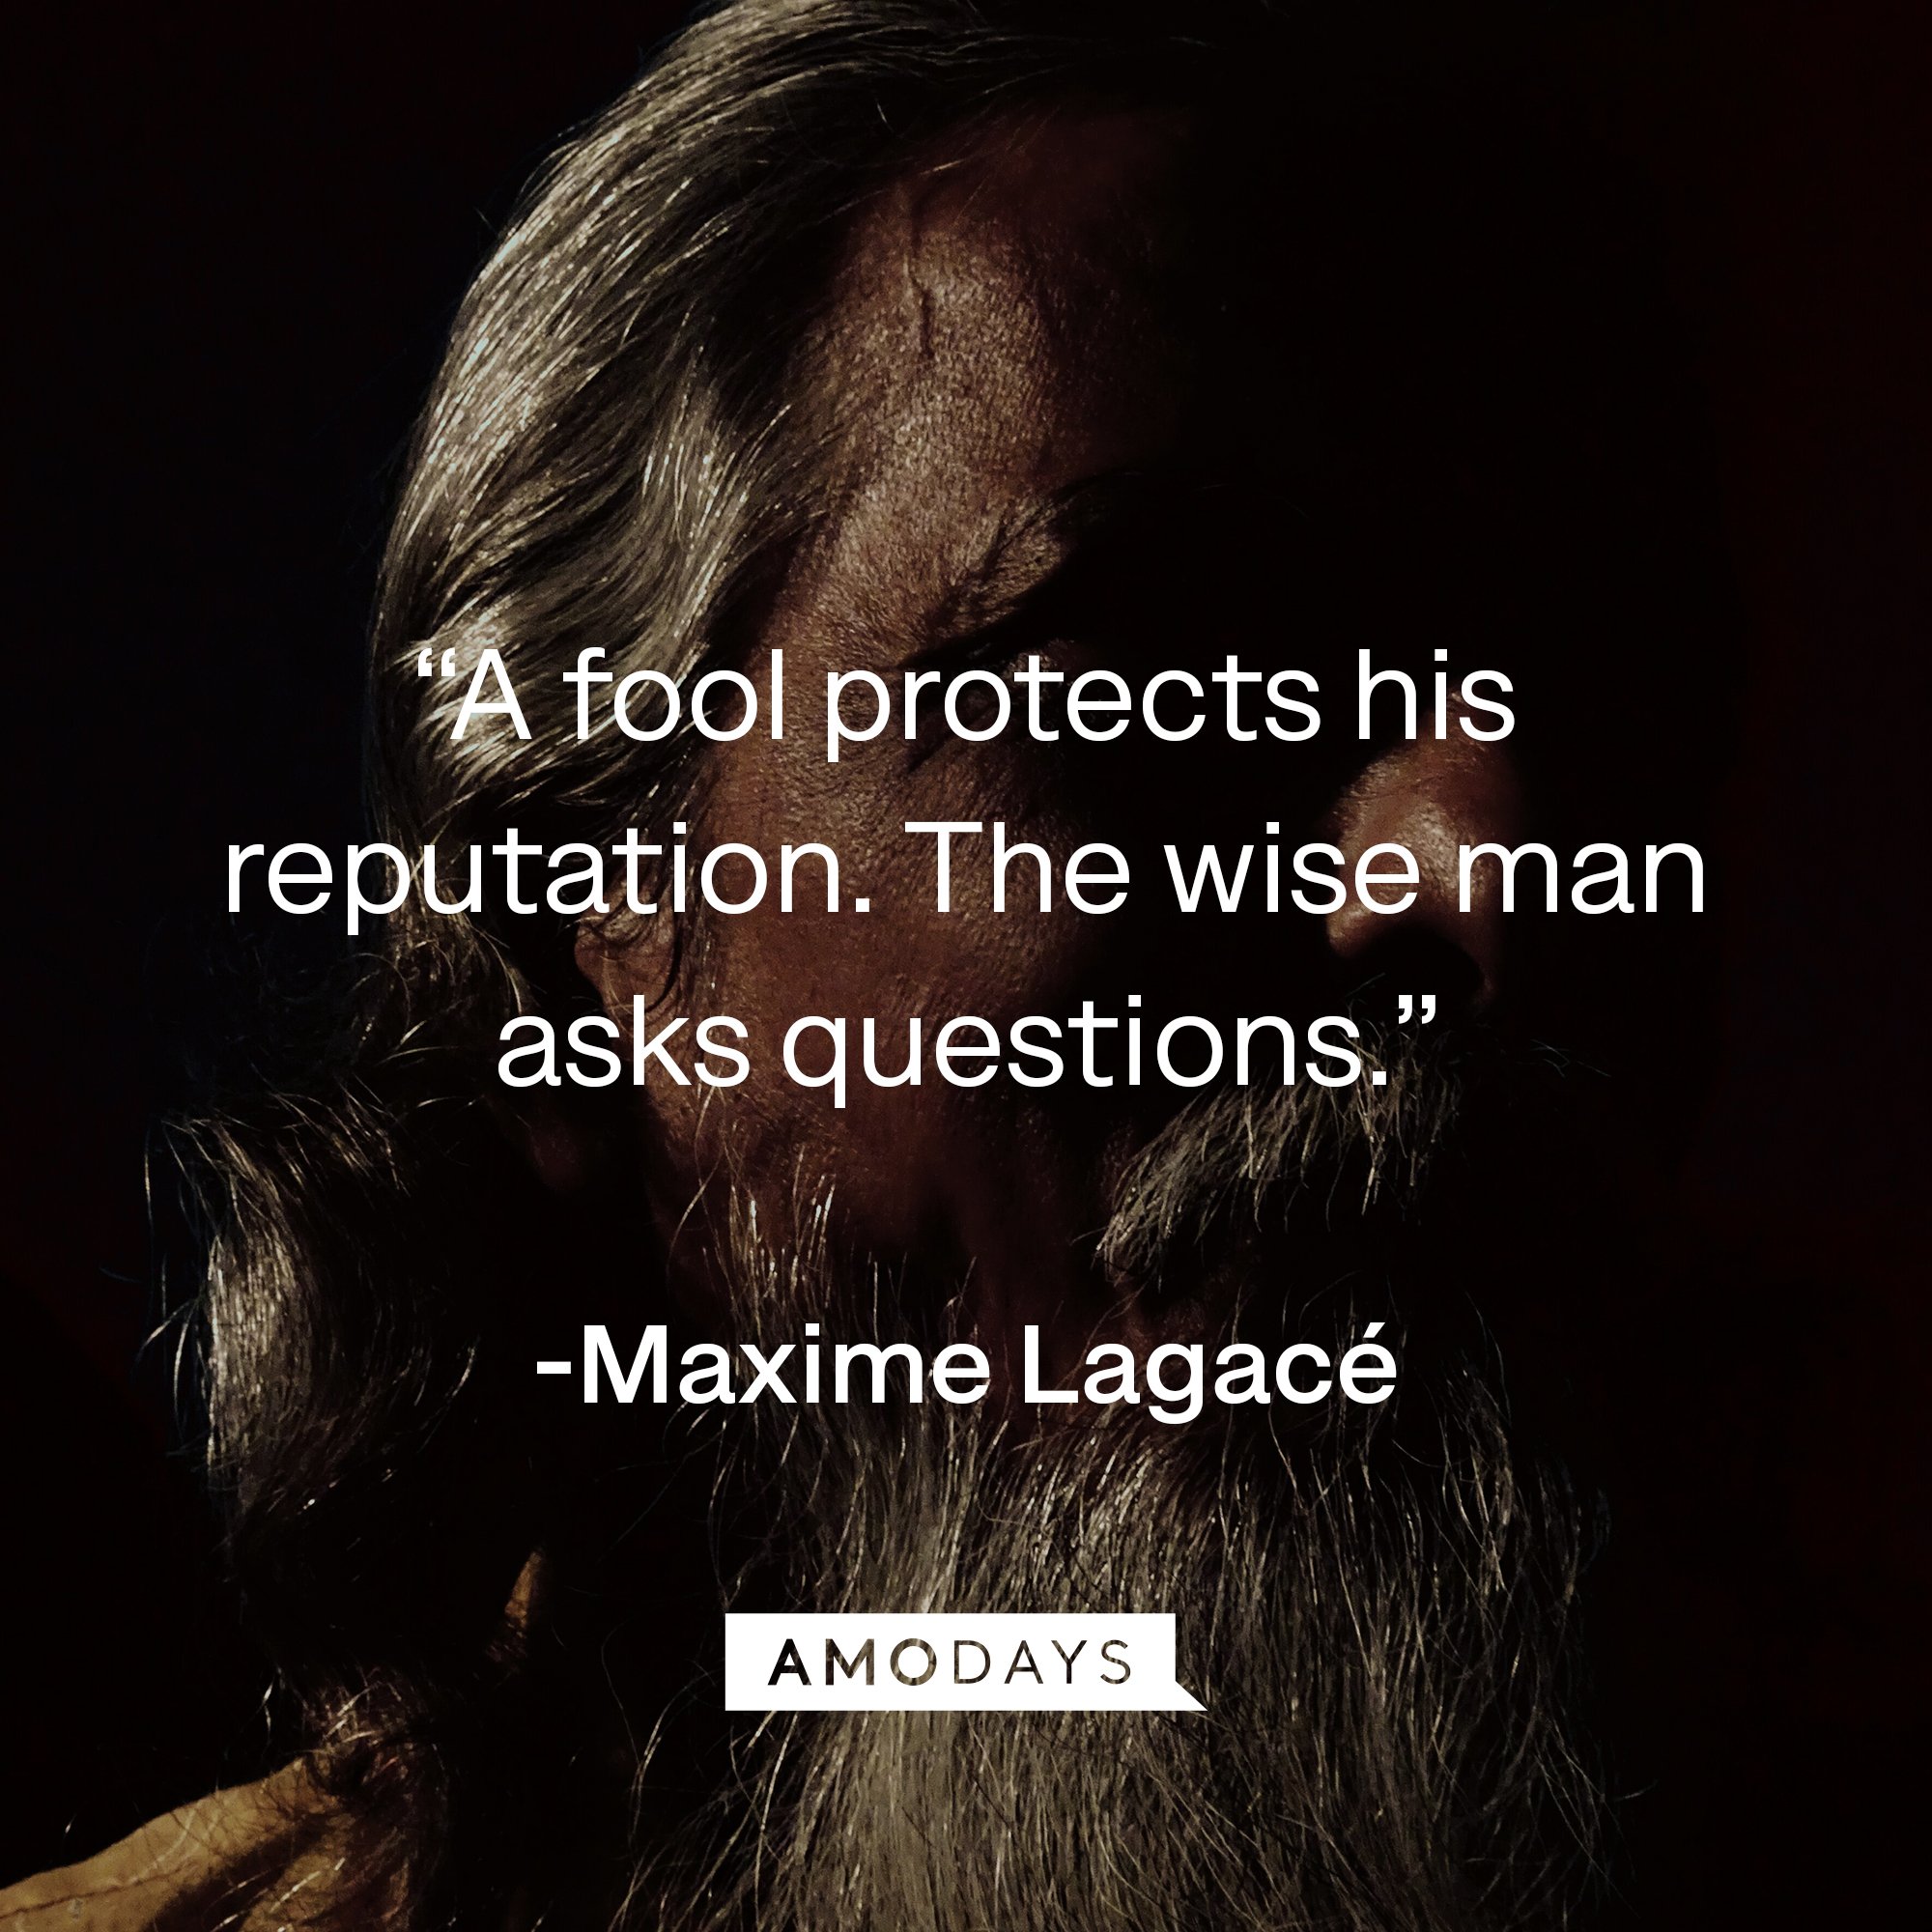  Maxime Lagacé's quote: “A fool protects his reputation. The wise man asks questions.” | Image: AmoDays